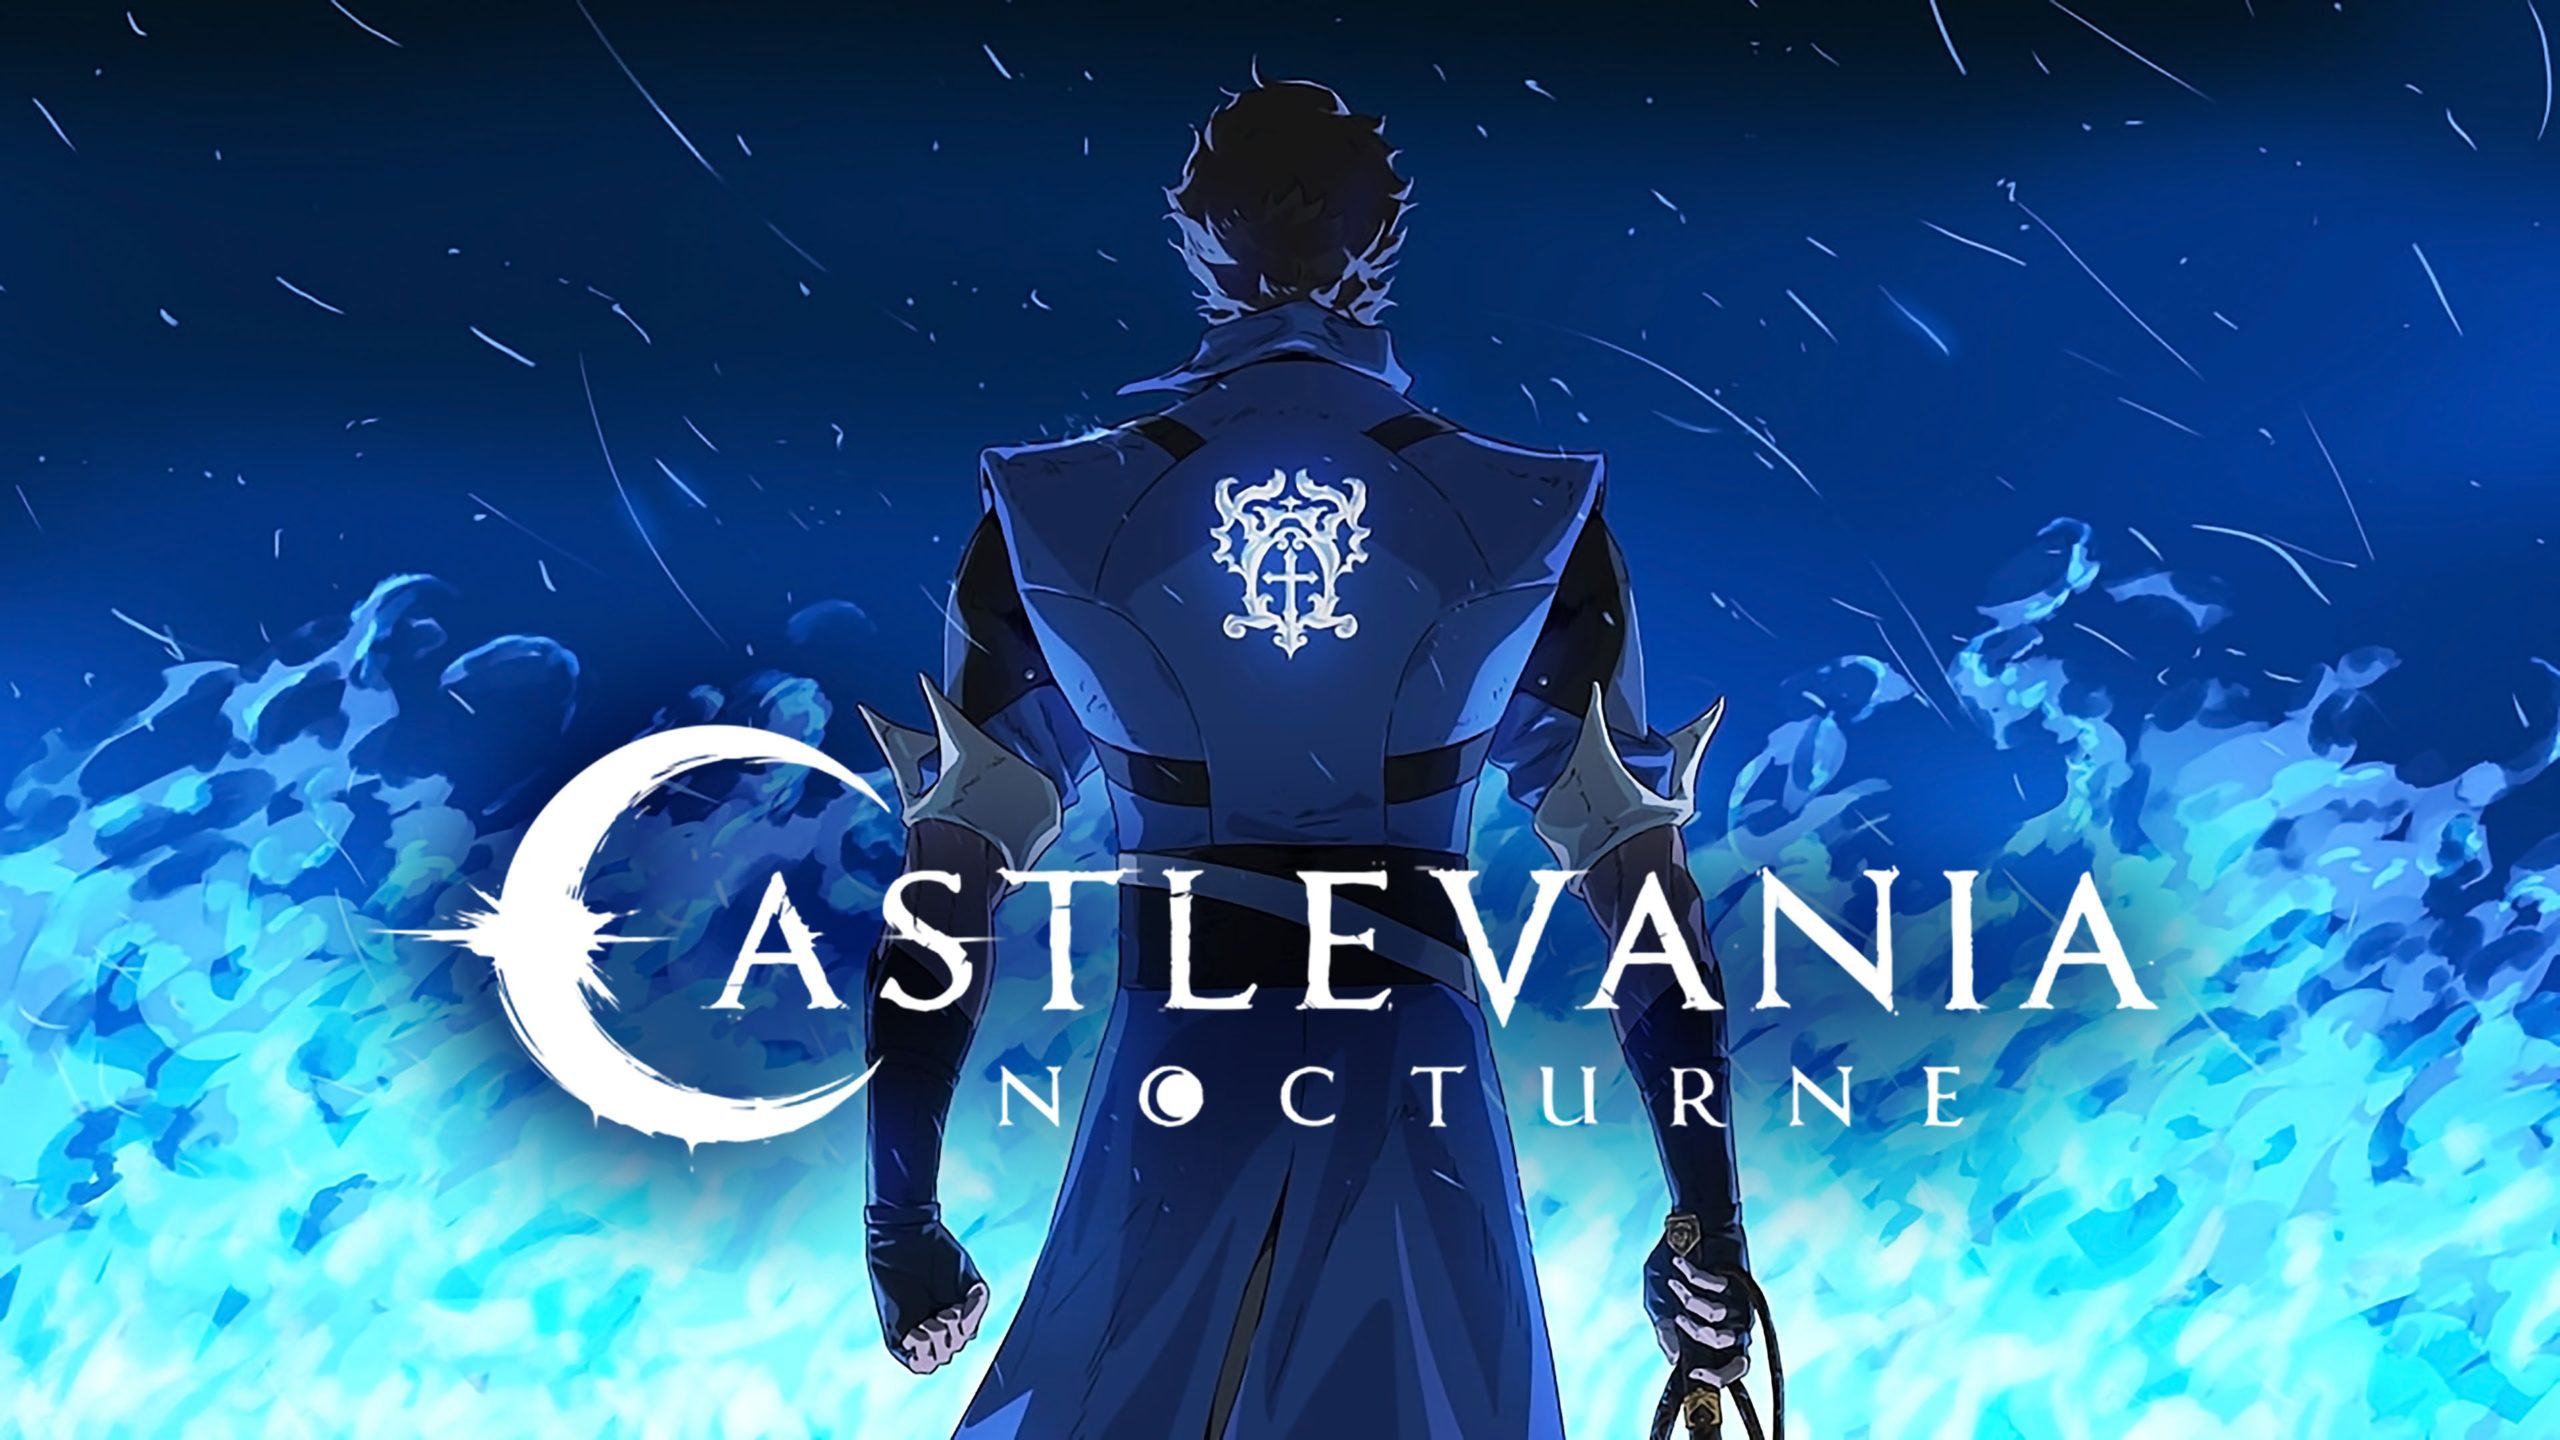 #Castlevania: Nocturne: Season Two Renewal Announced for Netflix’s Popular Video Game Adaptation Series